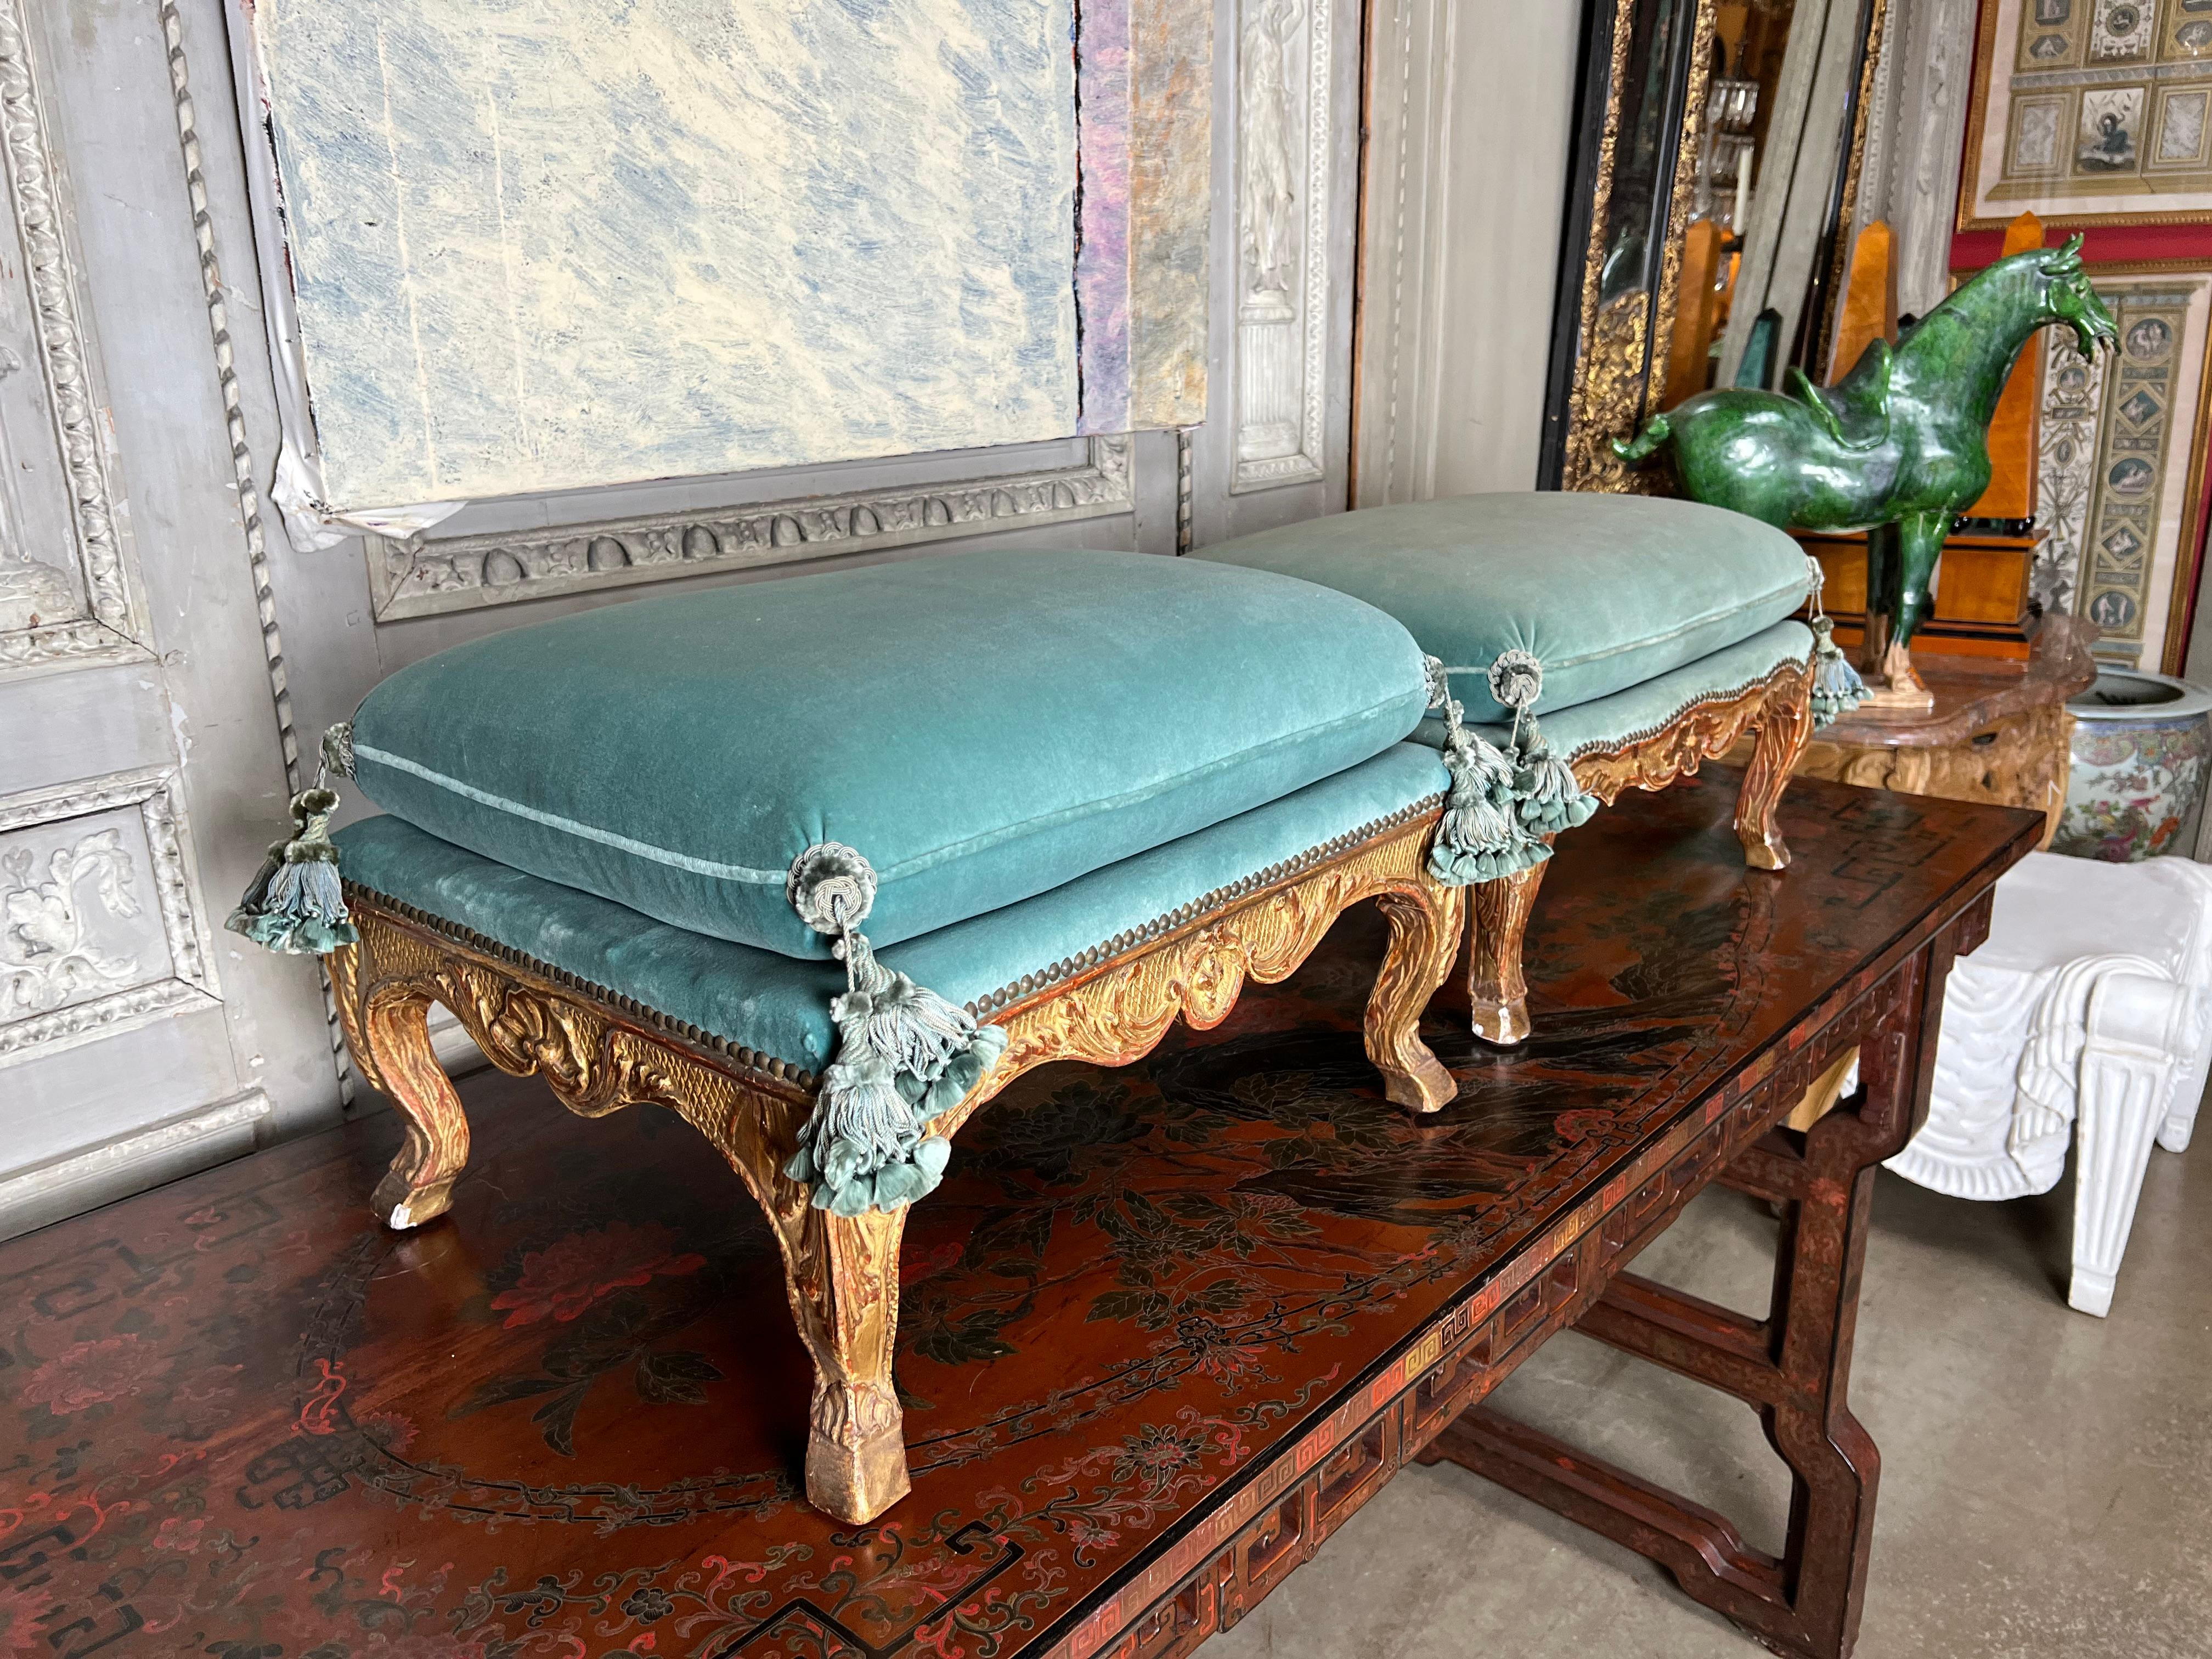 A matched pair of French gilt wood footstools in the Louis XV style dating form the late 19th century. These incredible footstools were obviously made by the same crafts person as they are both carved in their entirety. They are carved and gilded